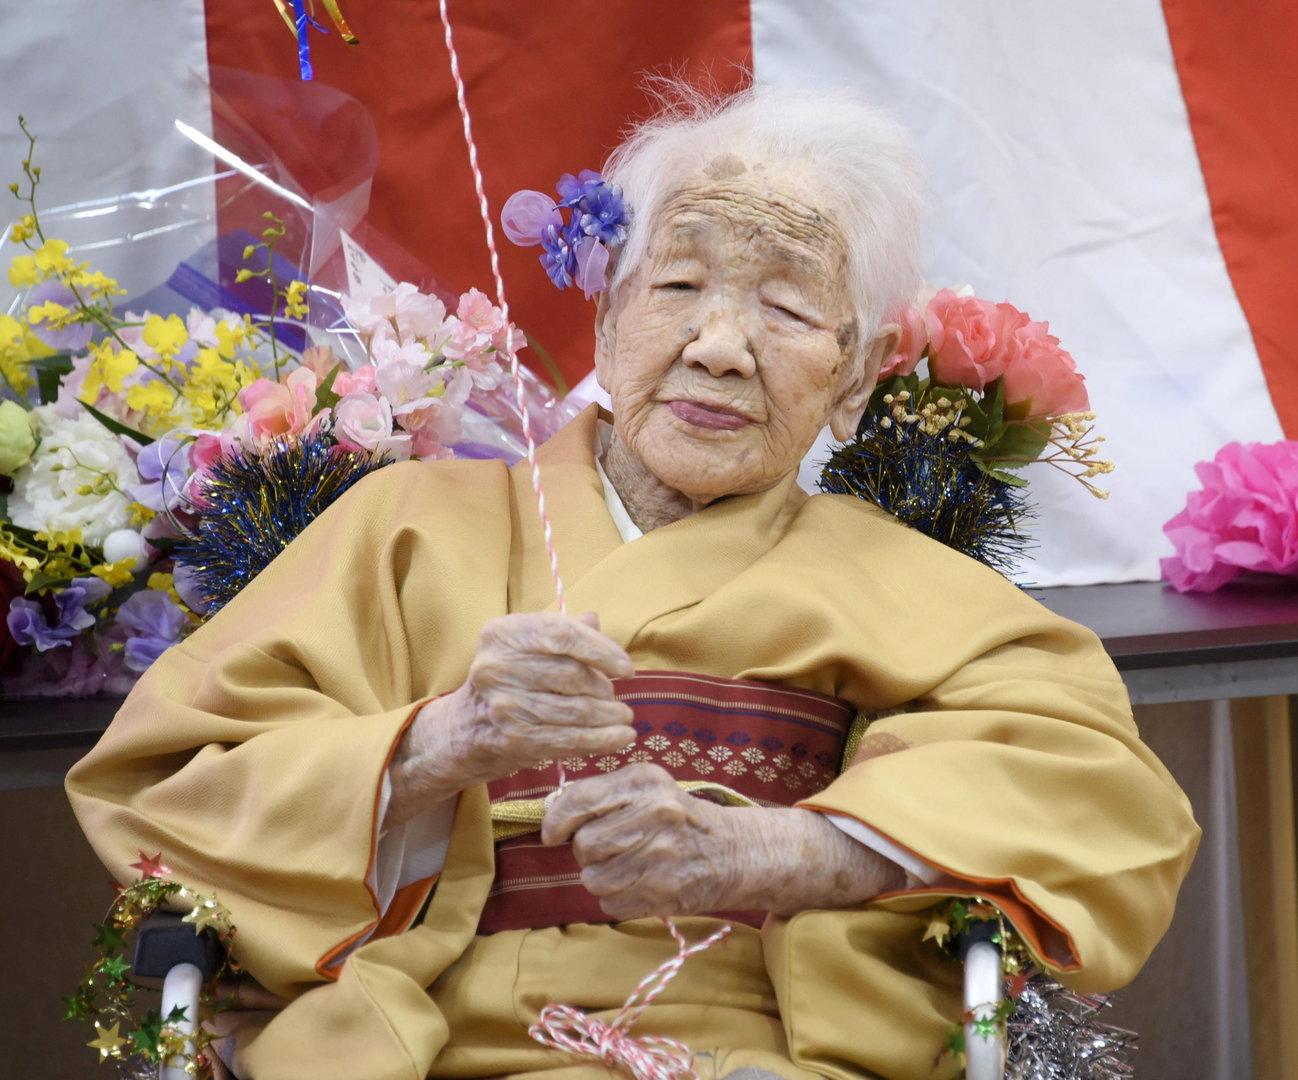 The oldest person in the world celebrates his 119th birthday thumbnail